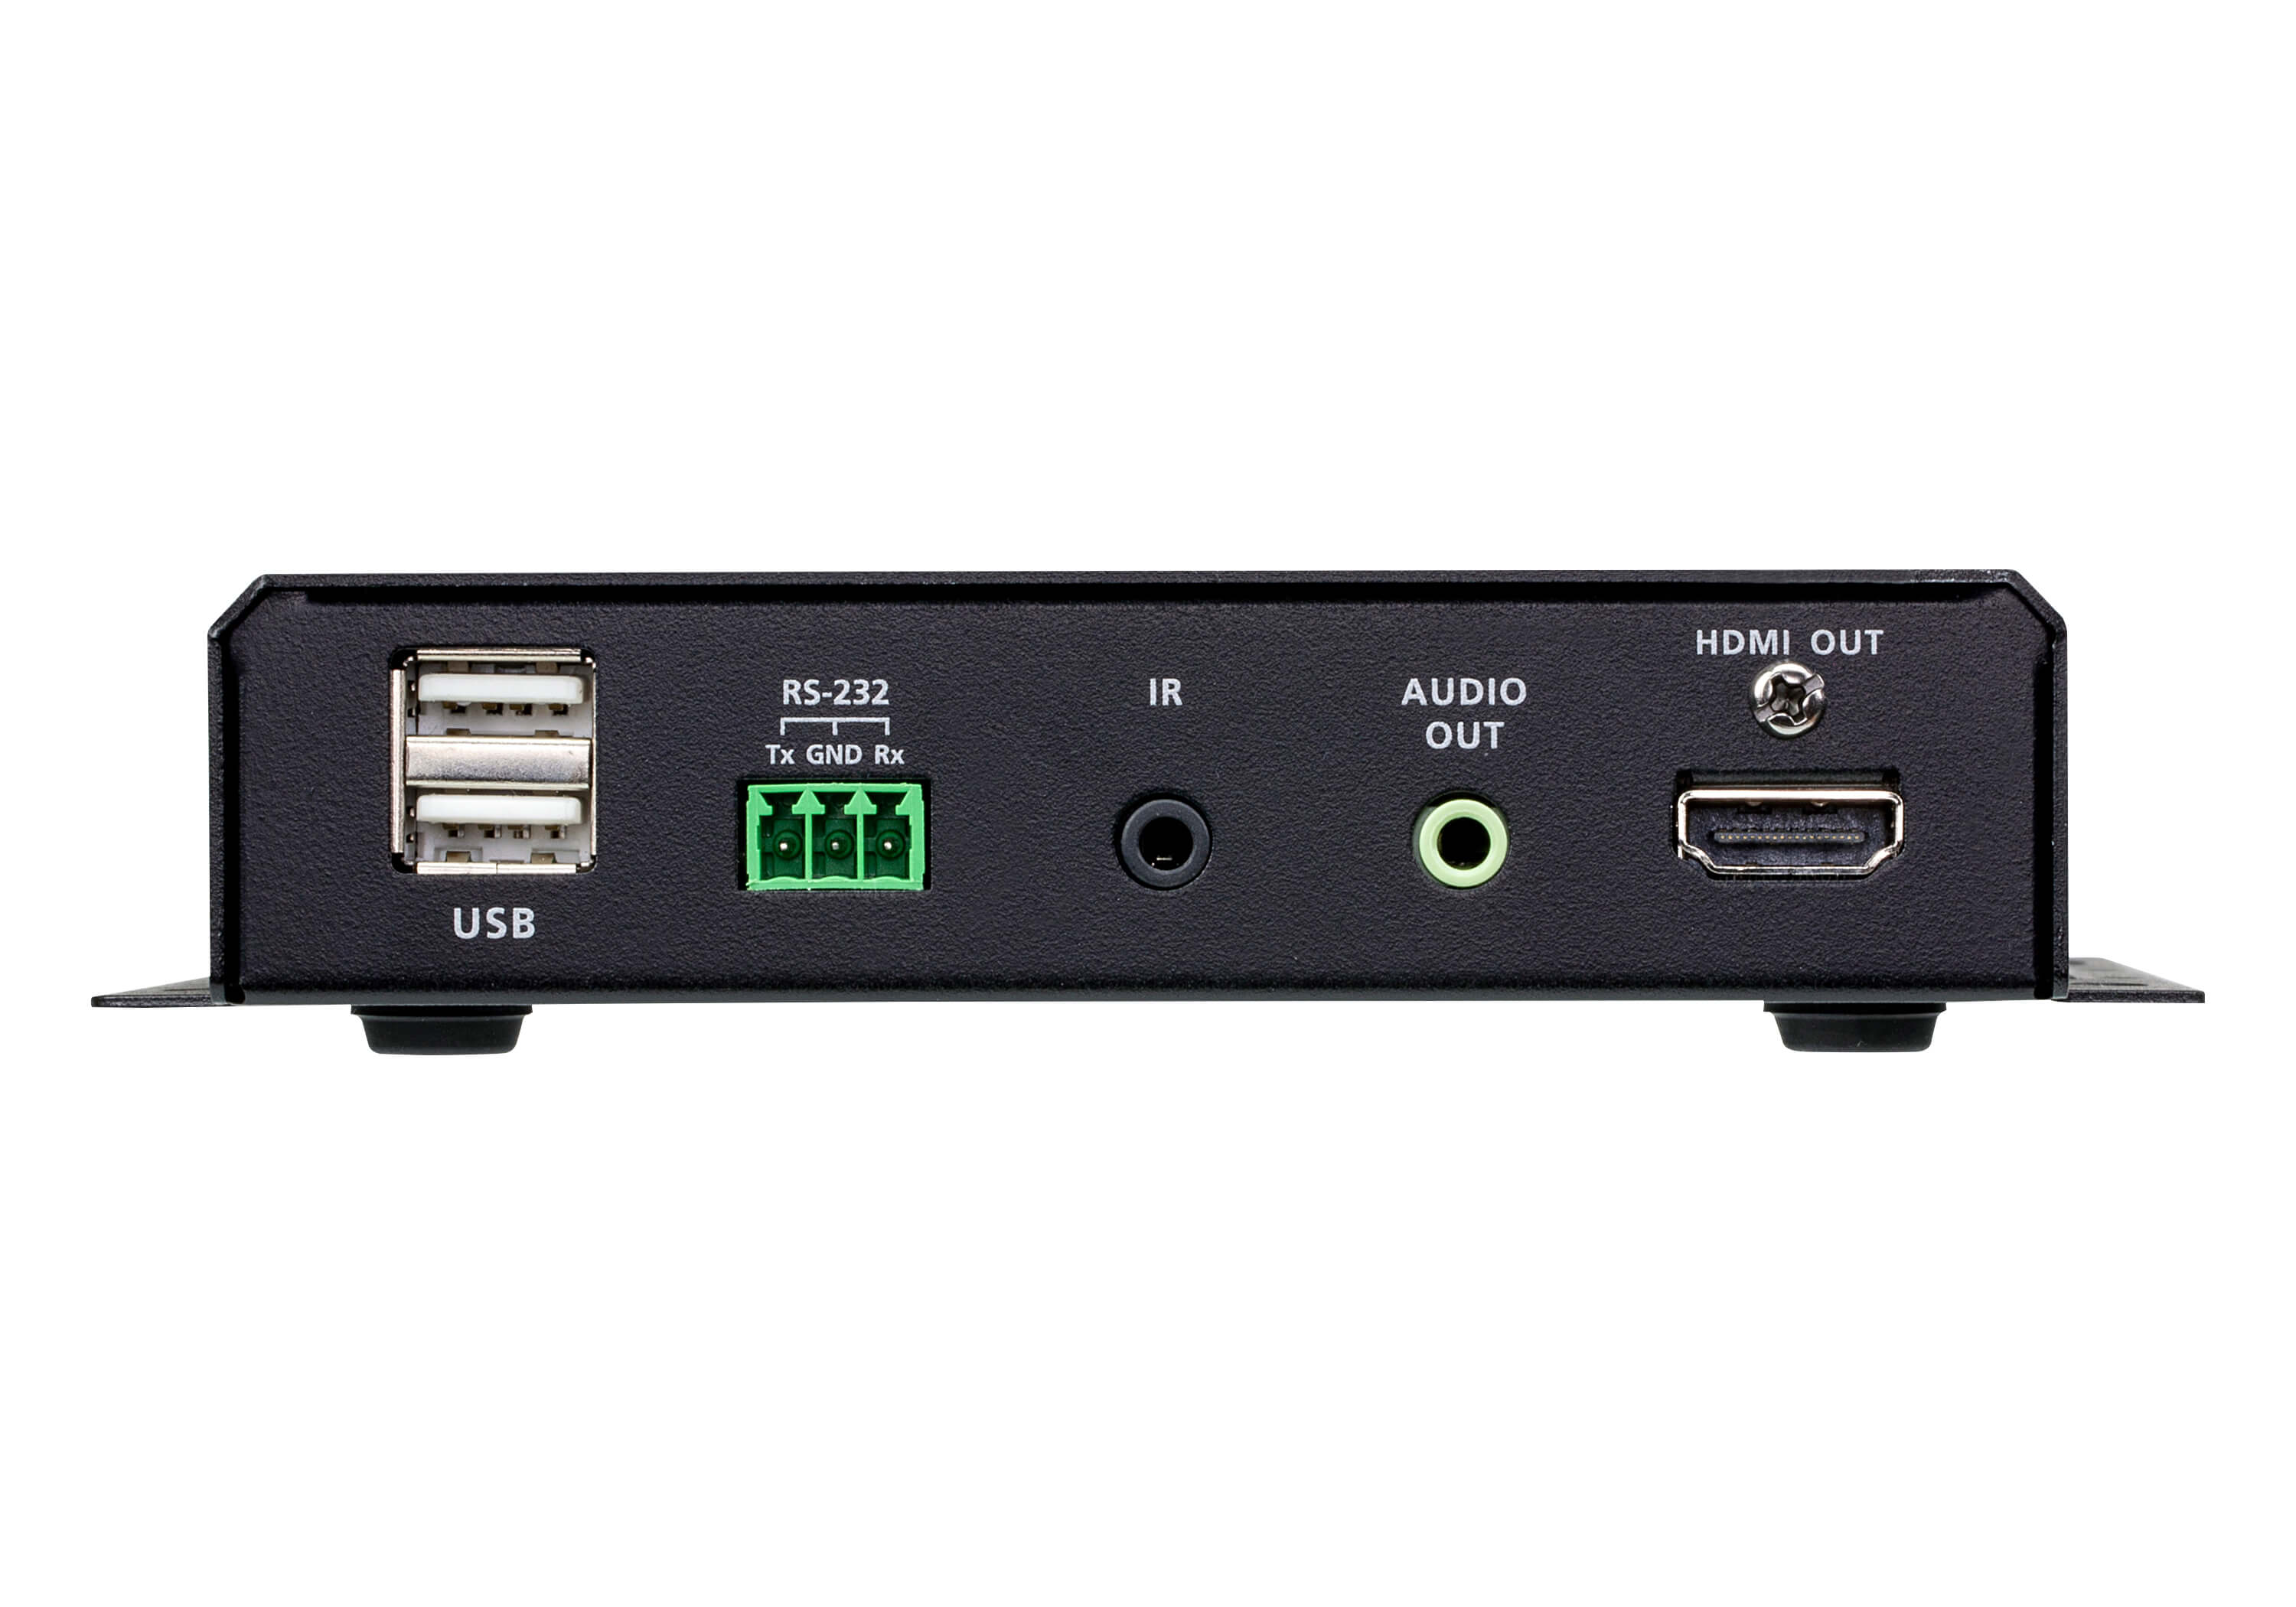 Aten 4K HDMI over IP Receiver with PoE -VE8952R (3 Year Manufacture Local Warranty In Singapore)